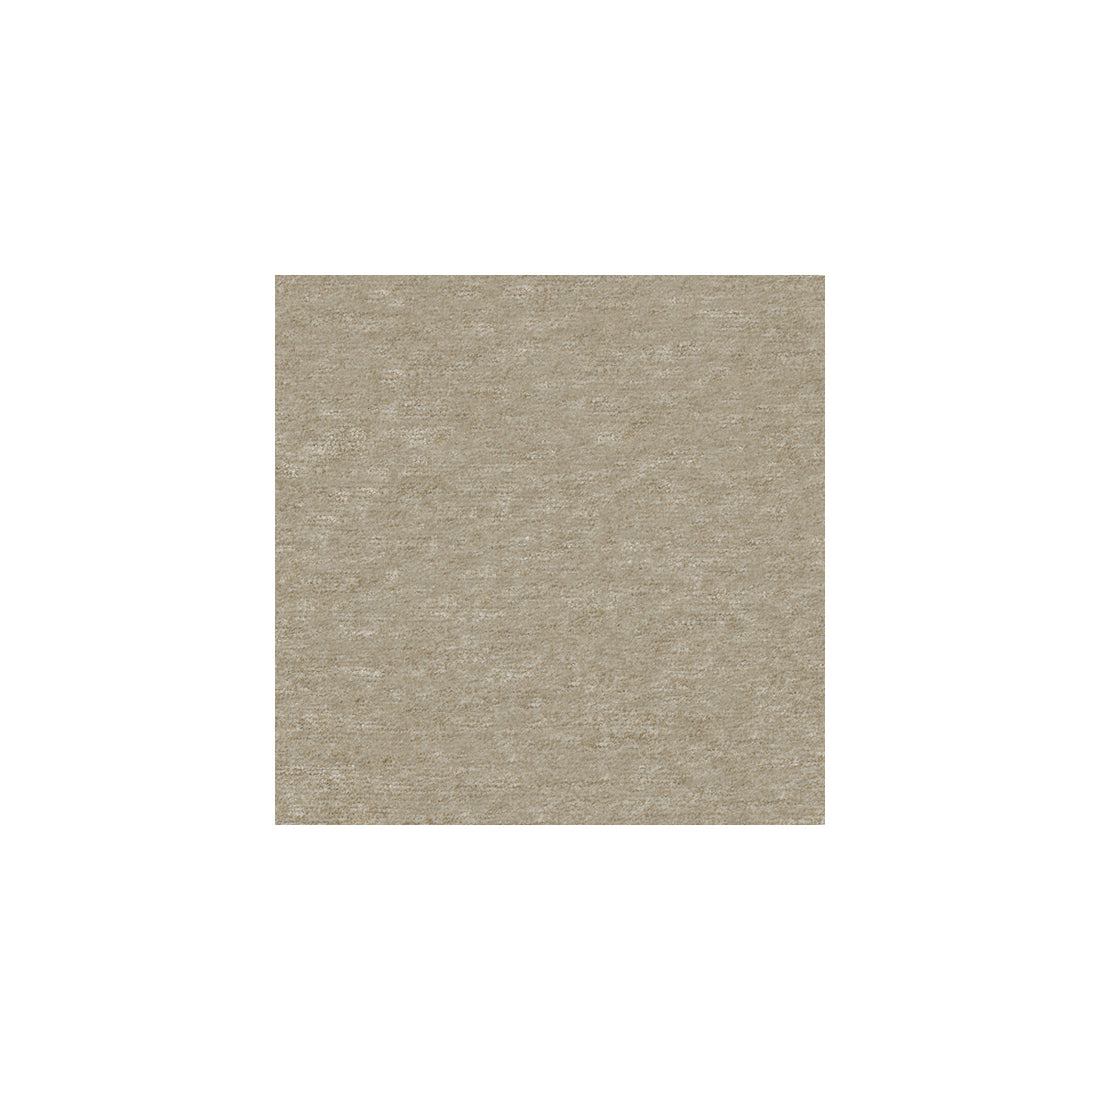 Kravet Contract fabric in 32016-16 color - pattern 32016.16.0 - by Kravet Contract